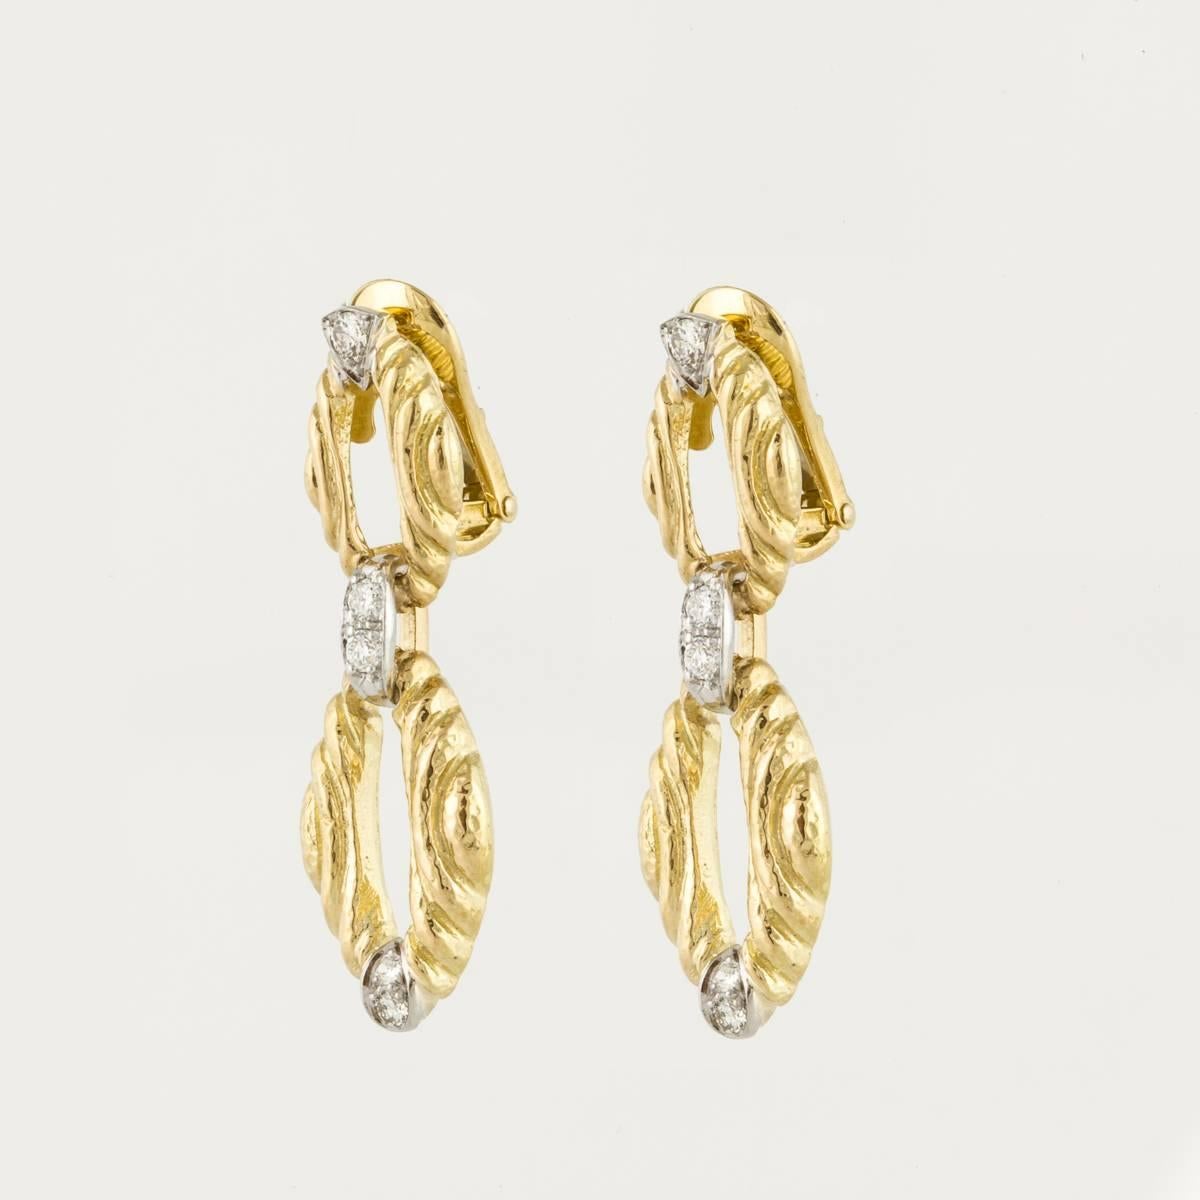 These David Webb earrings are 18K yellow gold with diamond accents.  The earrings are marked 